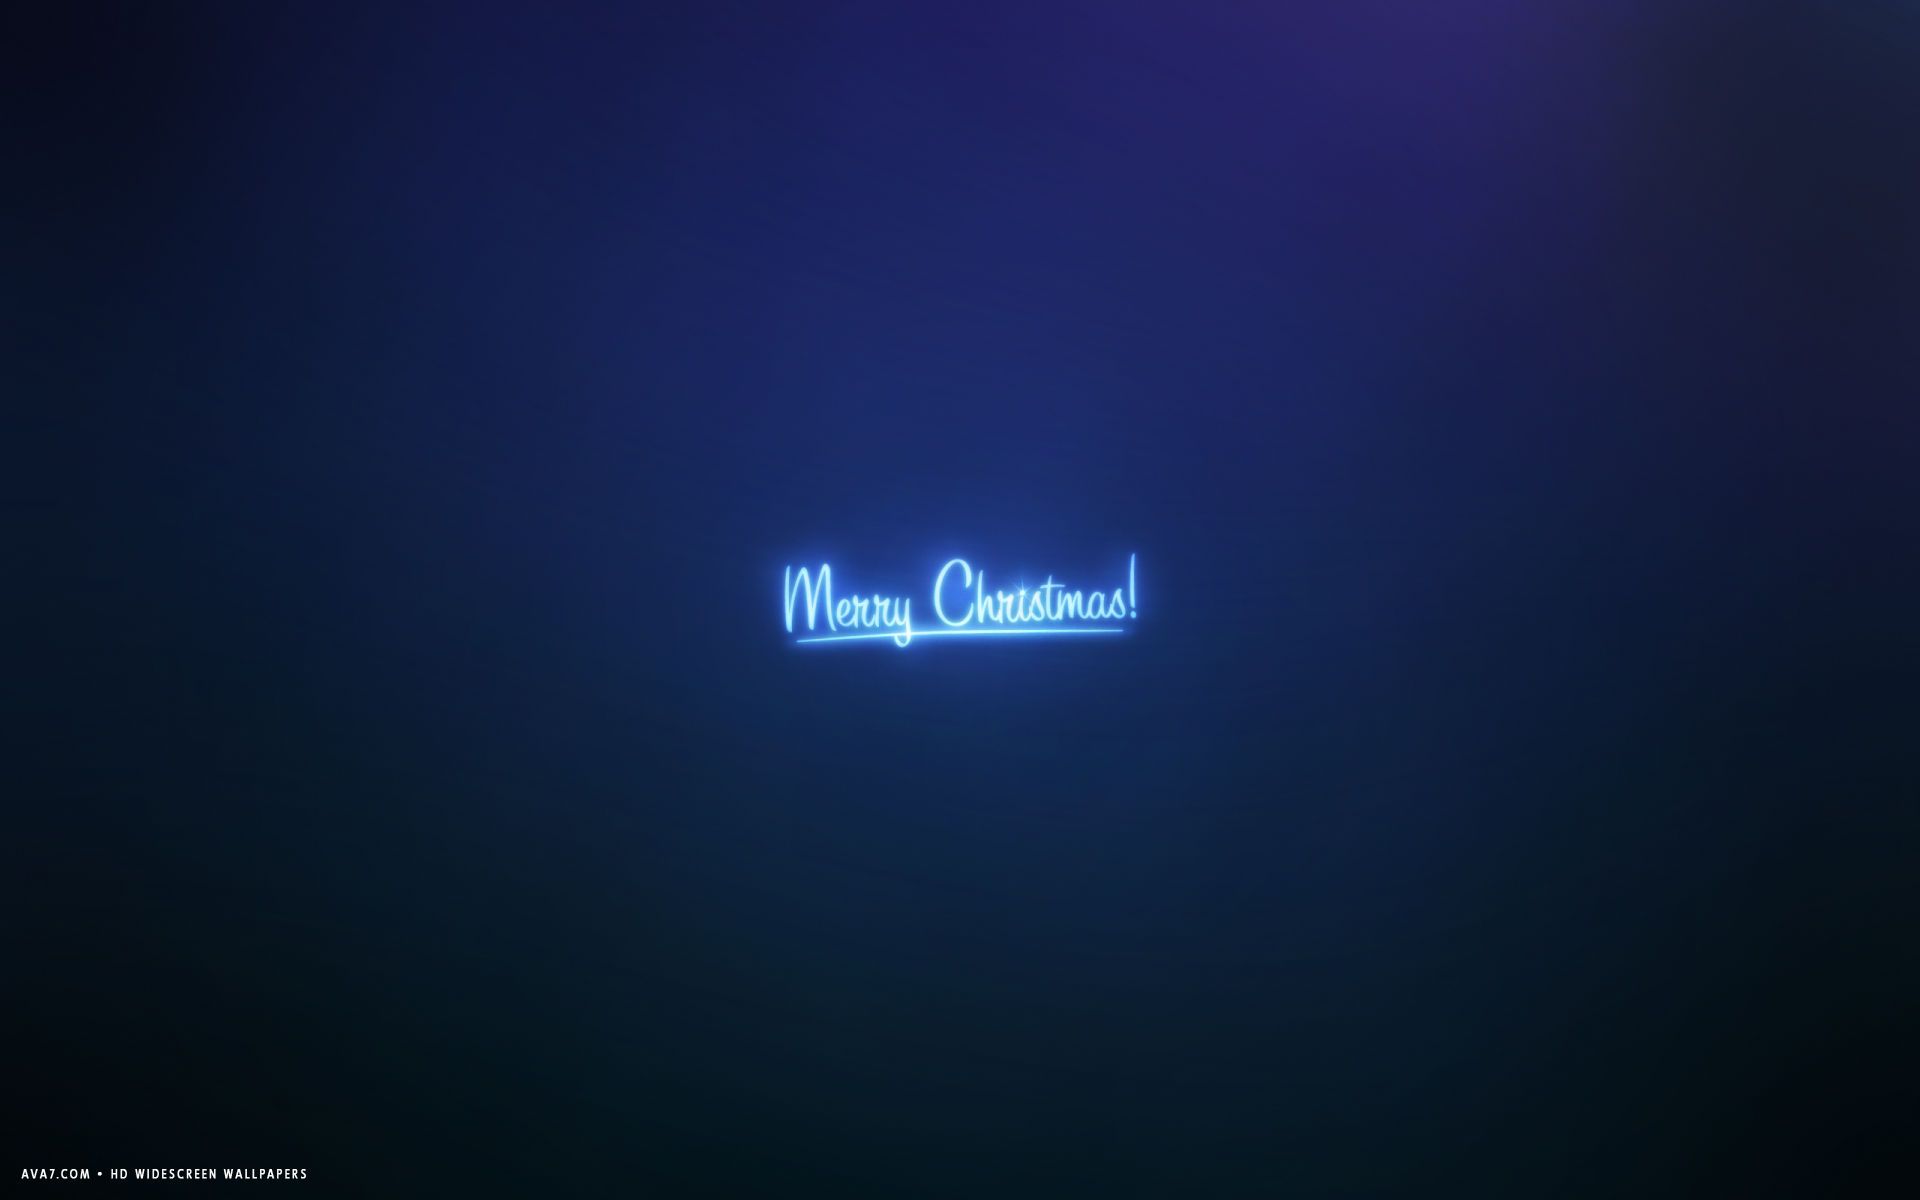 merry christmas simplicity blue minimalistic holiday HD widescreen wallpaper / holidays background